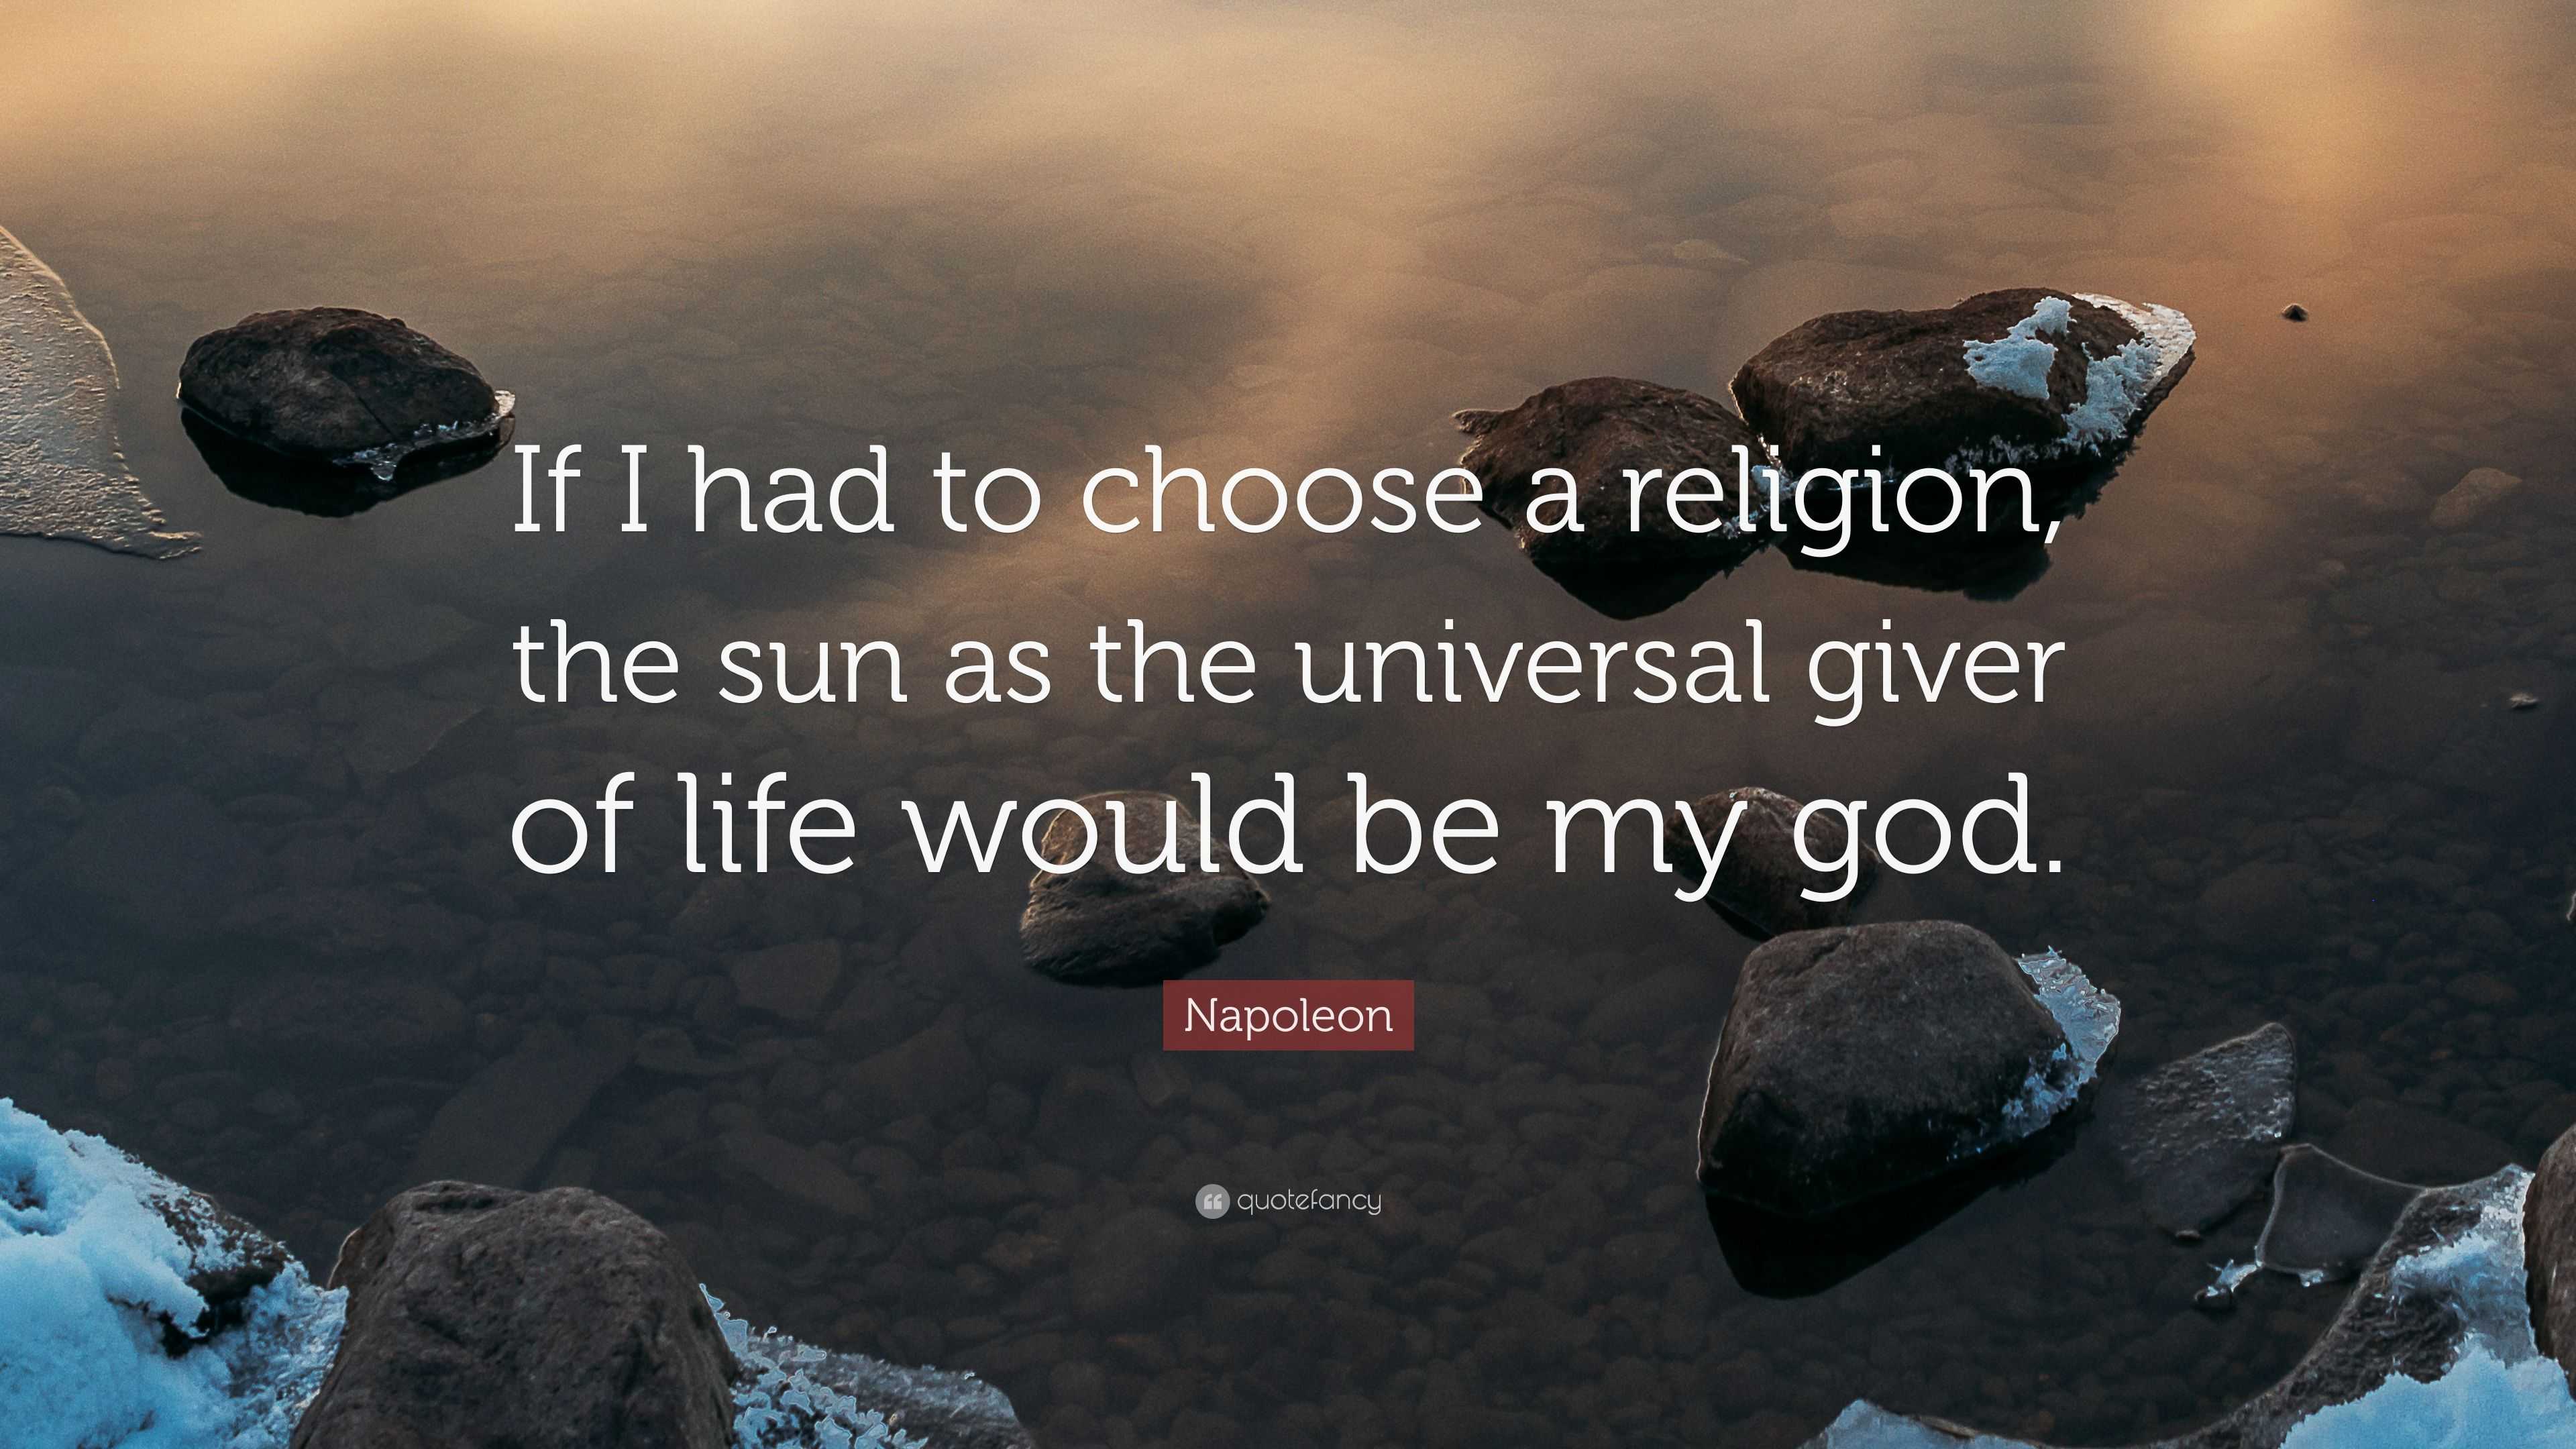 Napoleon Quote: “If I had to choose a religion, the sun as the ...